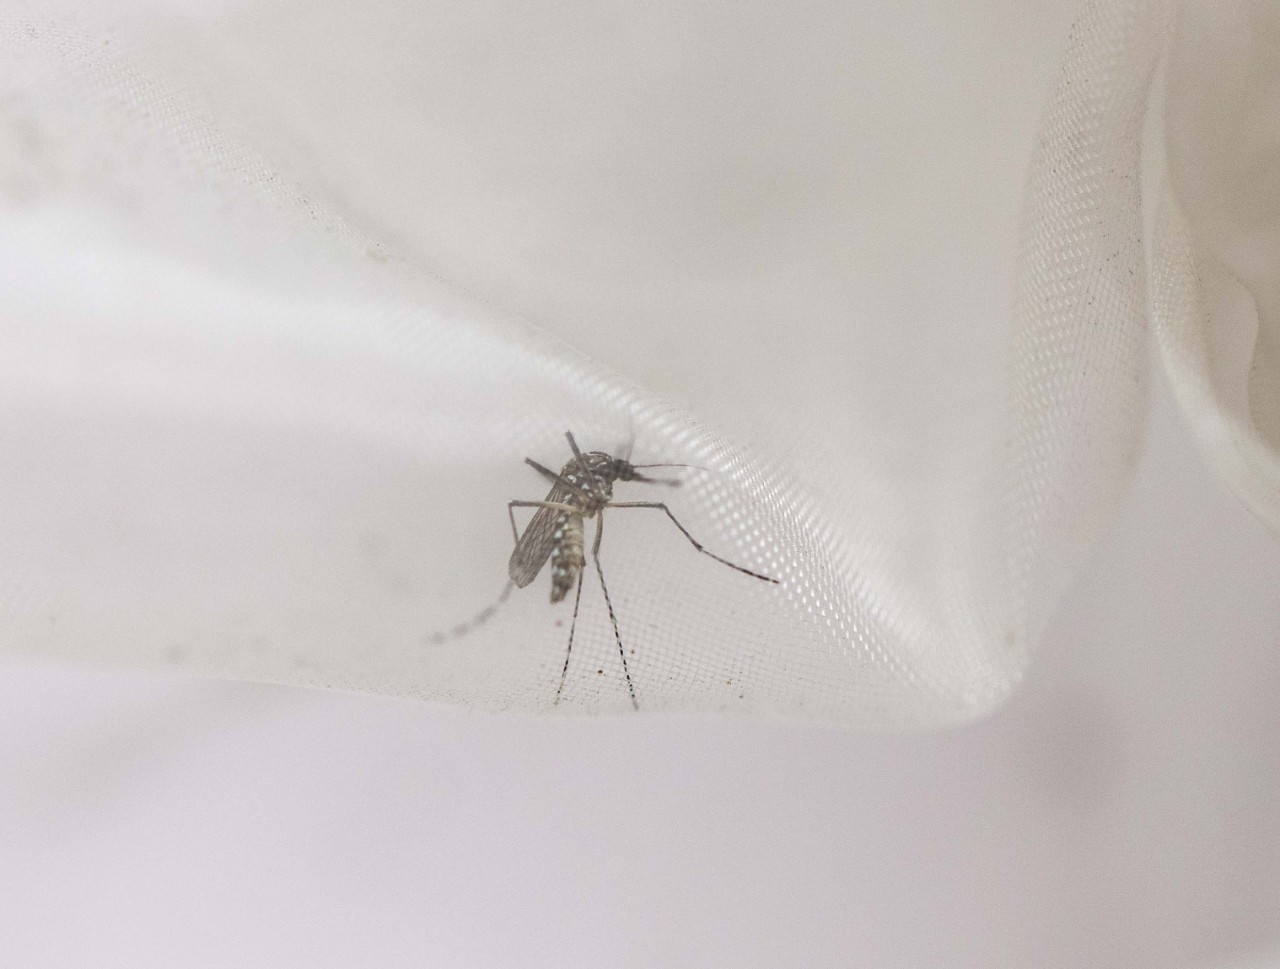 A mosquito perches on mesh netting.